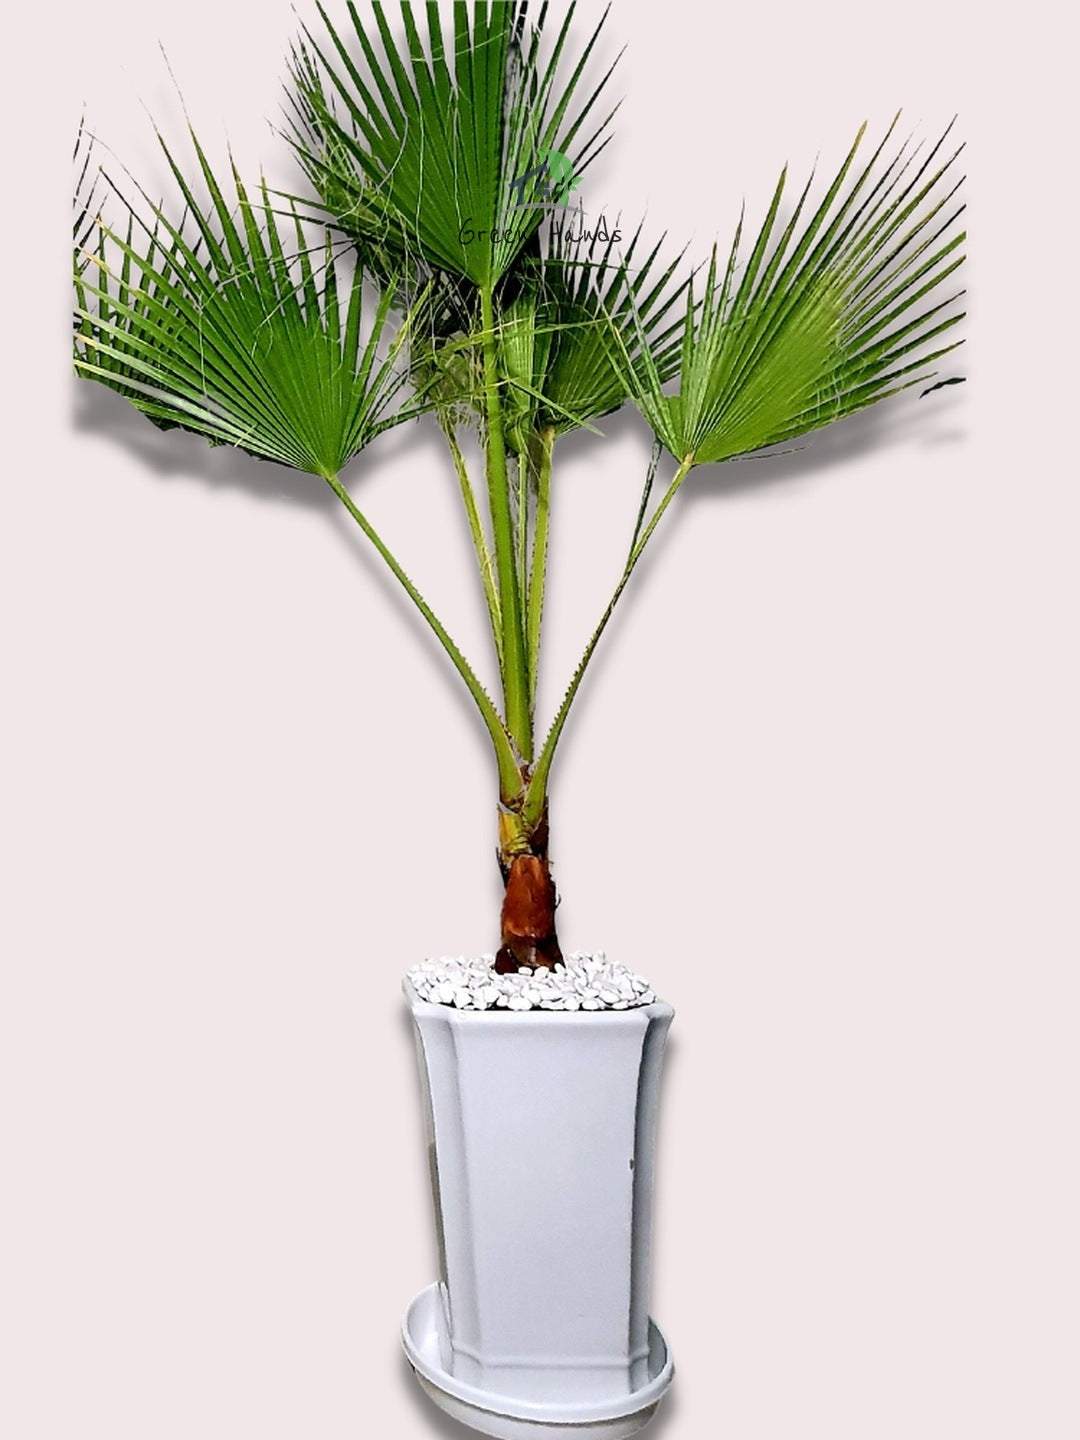 Potted Washington Palm Planted in White Ceramic Pot